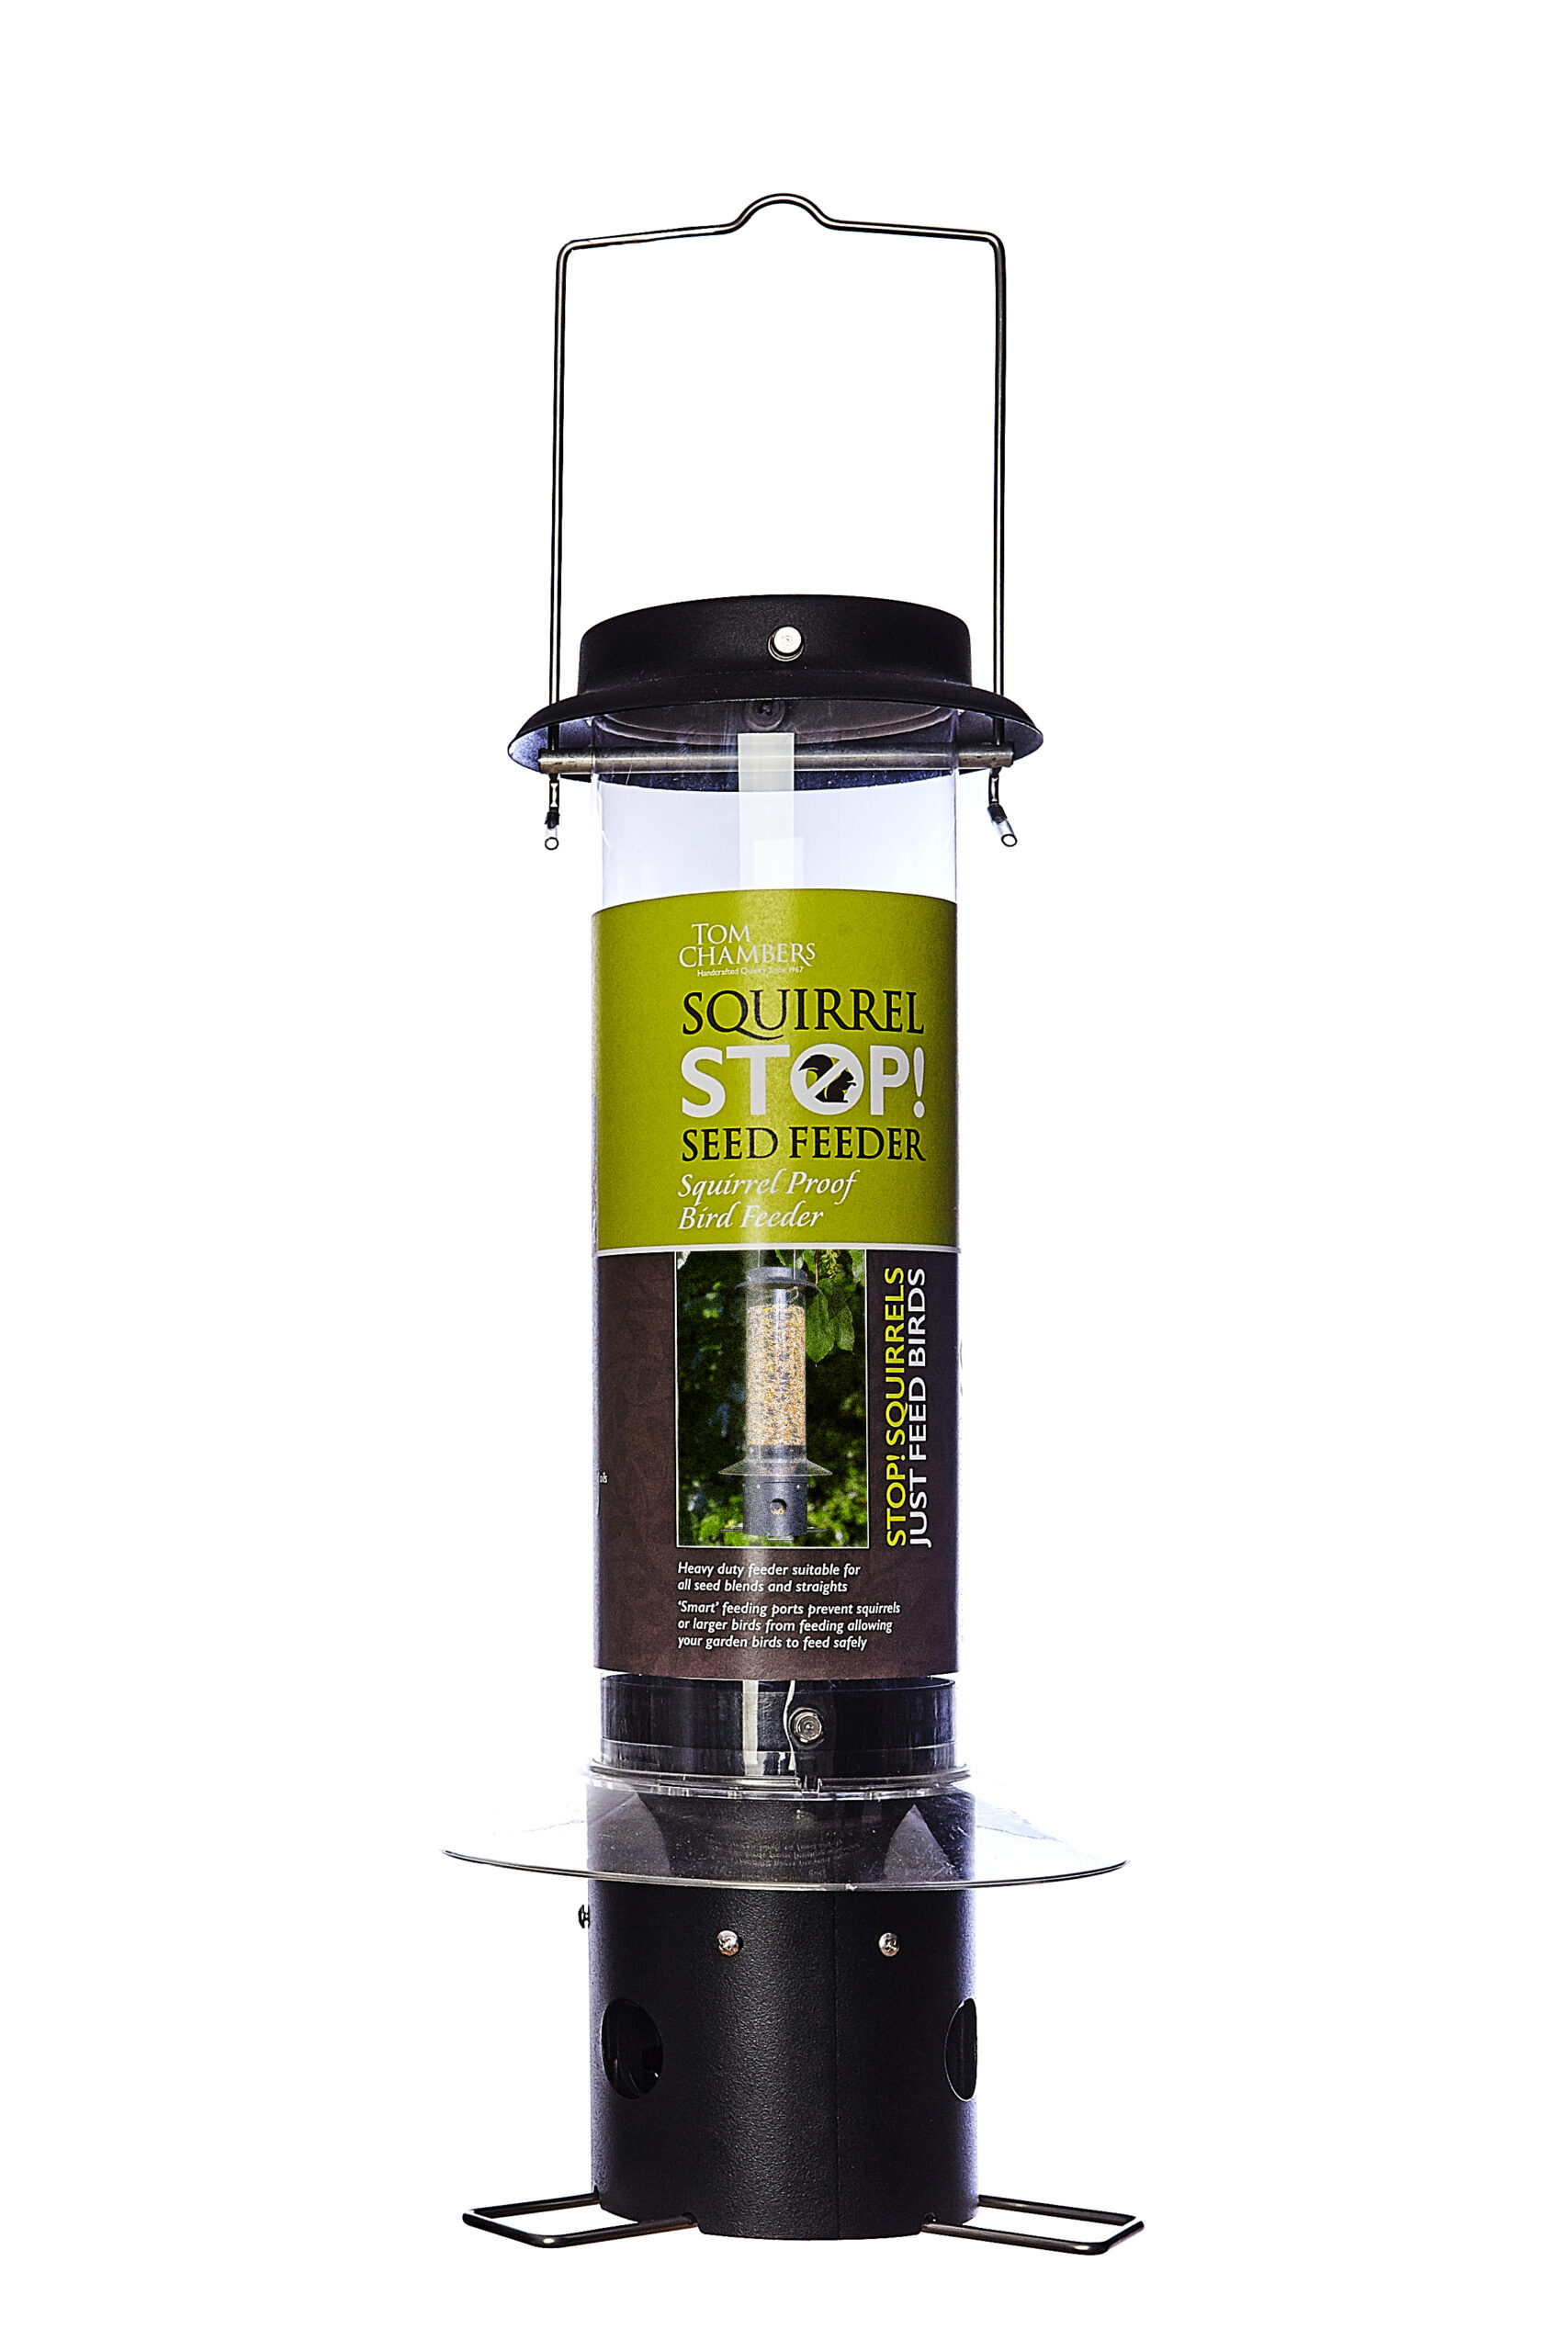 Tom chambers Squirrel Stop Seed Feeder